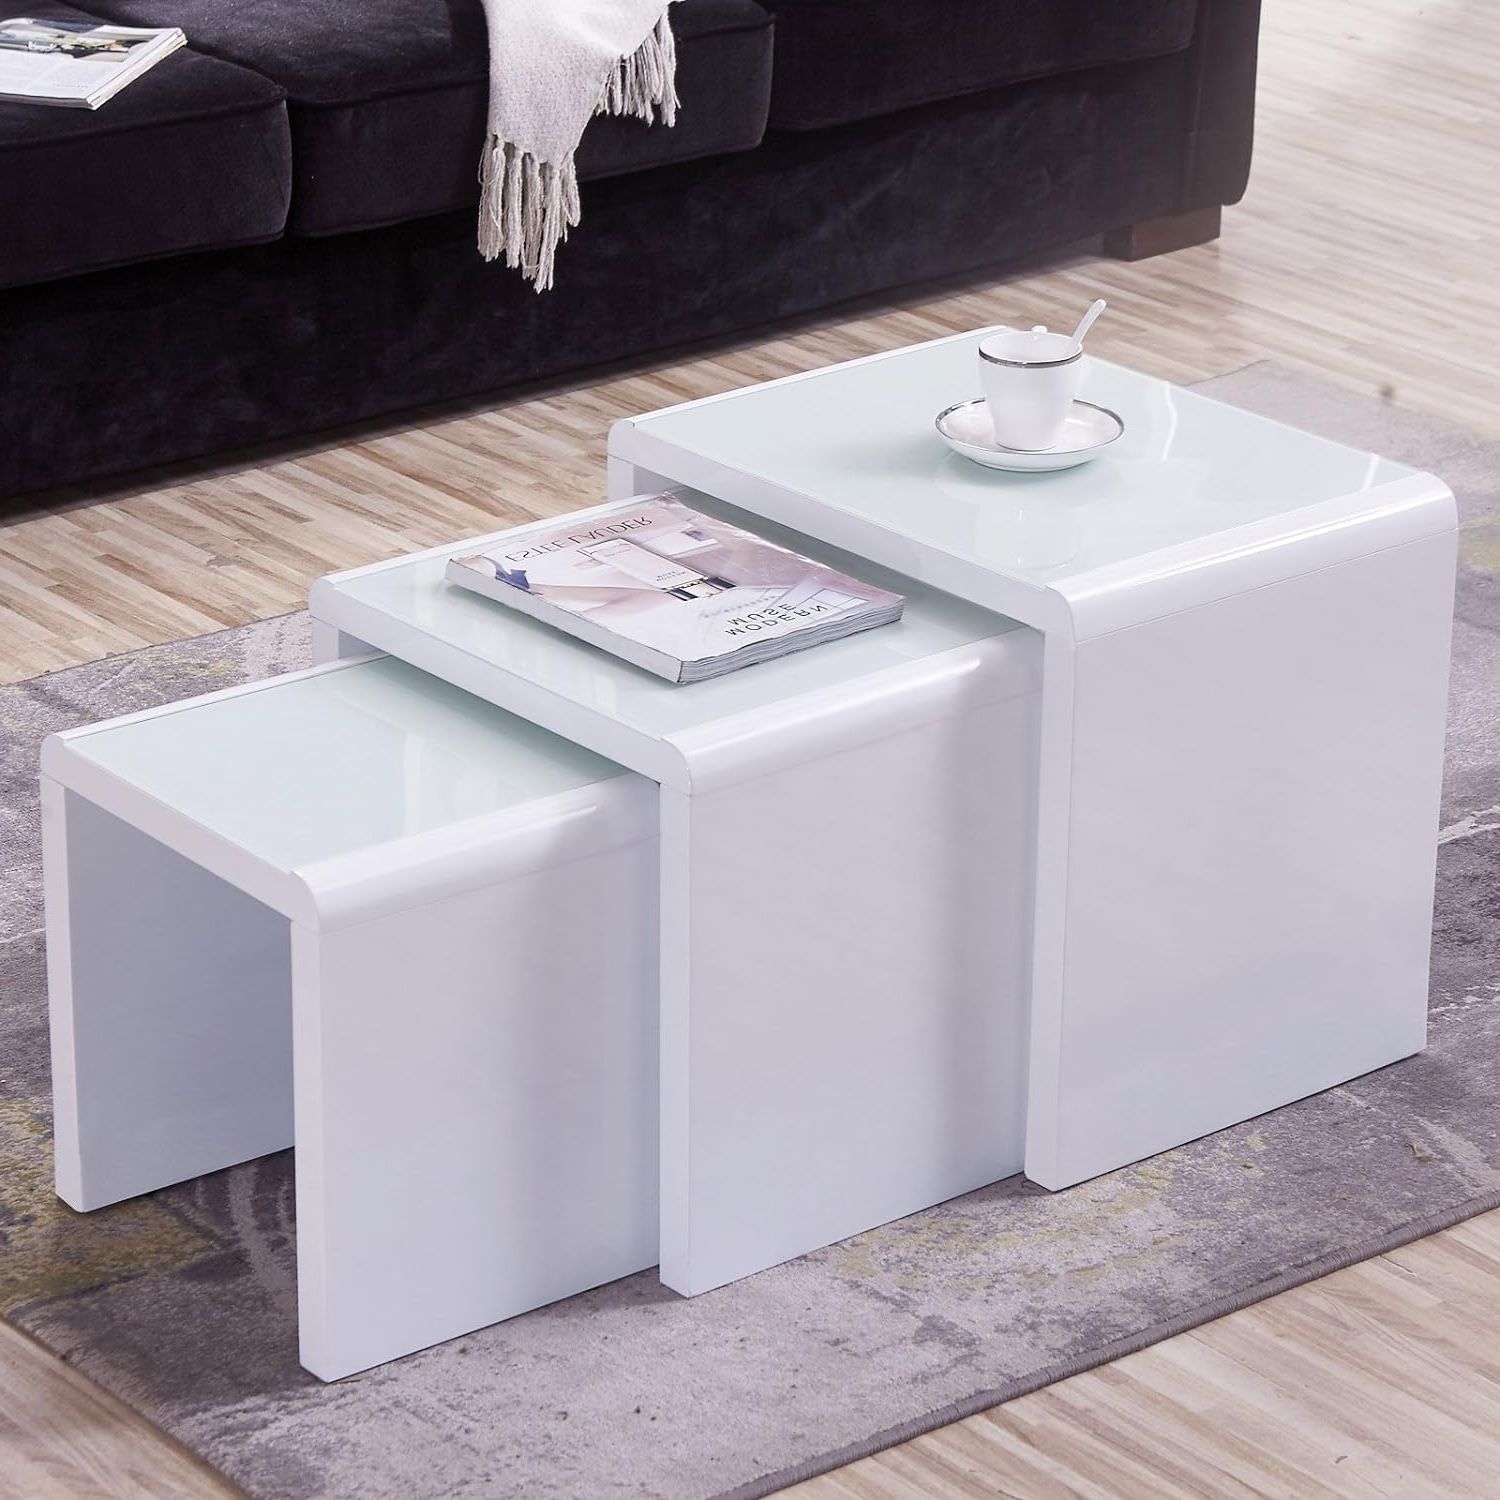 Favorite Coffee Tables Of 3 Nesting Tables Intended For Mecor Nest Of 3 Tables High Gloss Nesting Tables Wood Coffee Table (View 5 of 15)